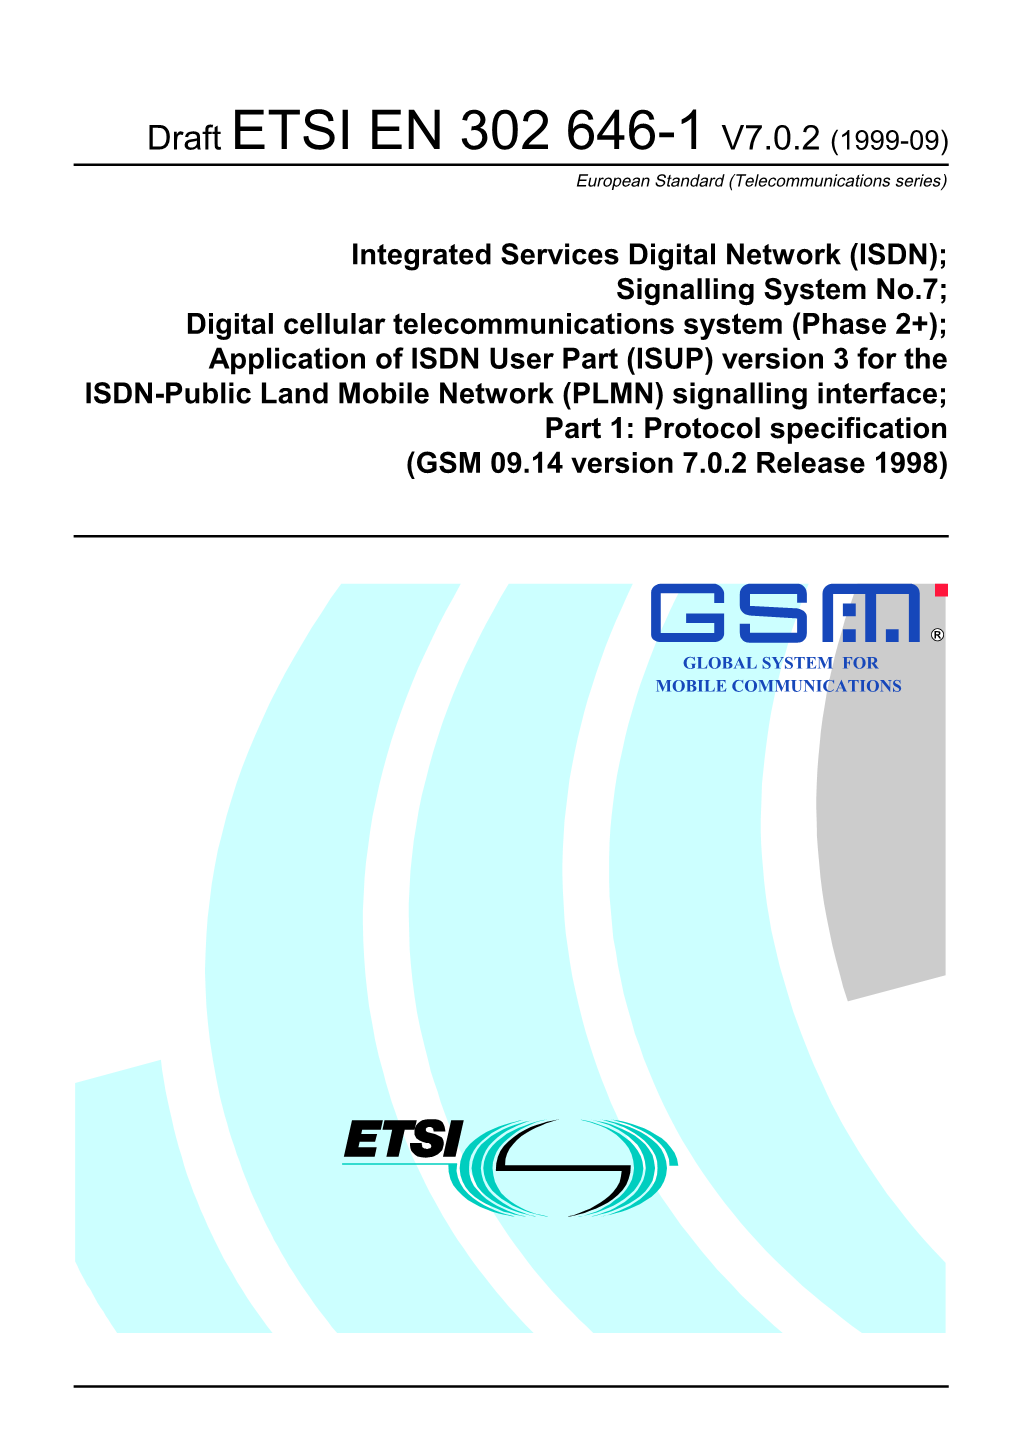 Integrated Services Digital Network (ISDN); Signalling System No.7